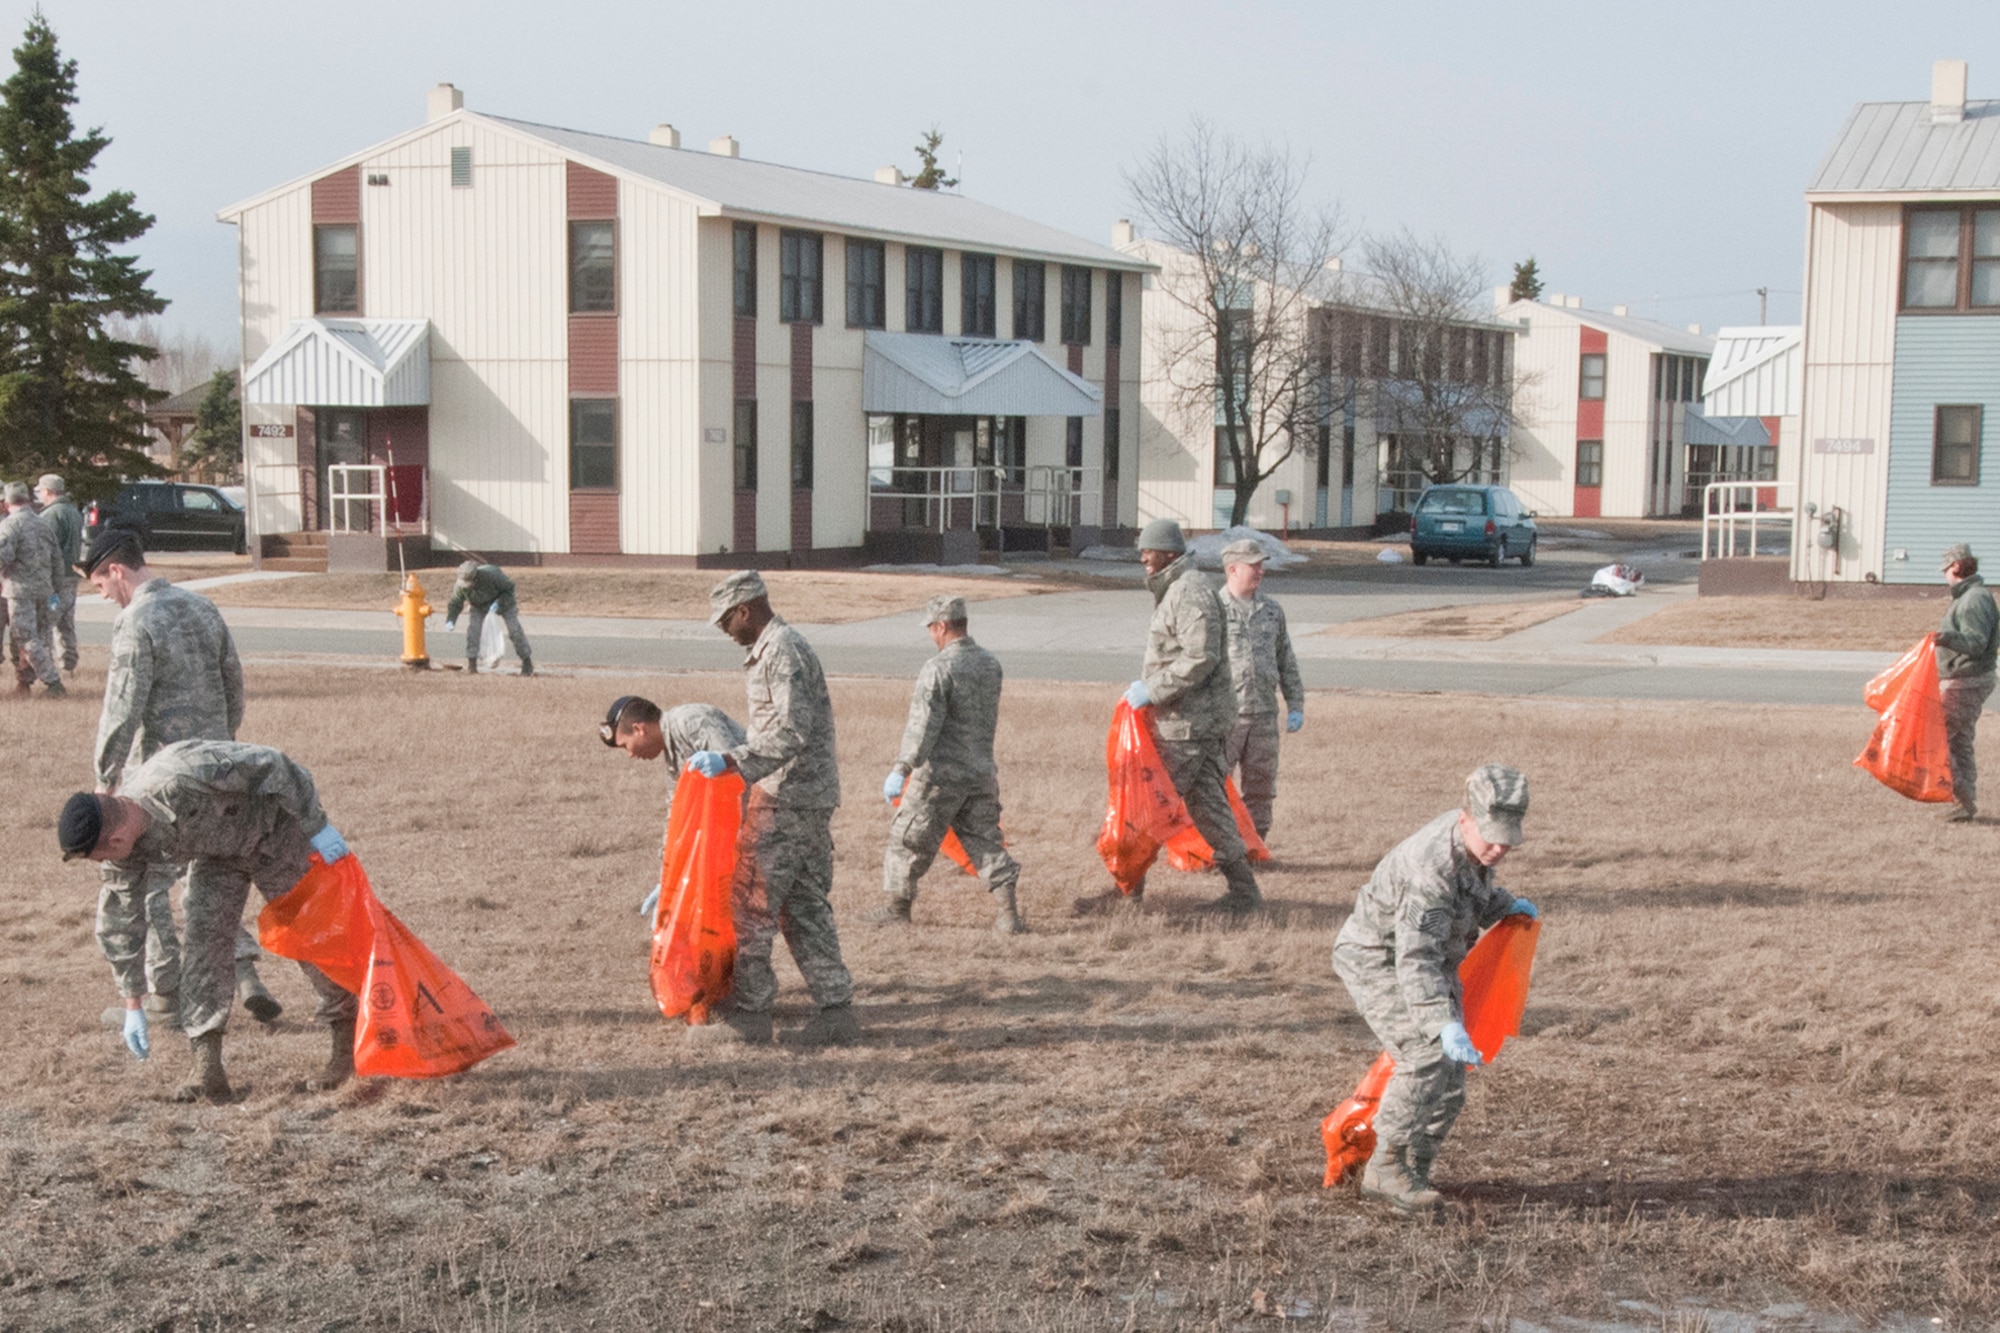 JOINT BASE ELMENDORF-RICHARDSON, Alaska -- 176 Wing members clean around their work building May 6 as part of the base's Spring Cleanup. Air guardsmen of all ranks helped in the effort.  National Guard photo by Staff Sgt. N. Alicia Goldberger.